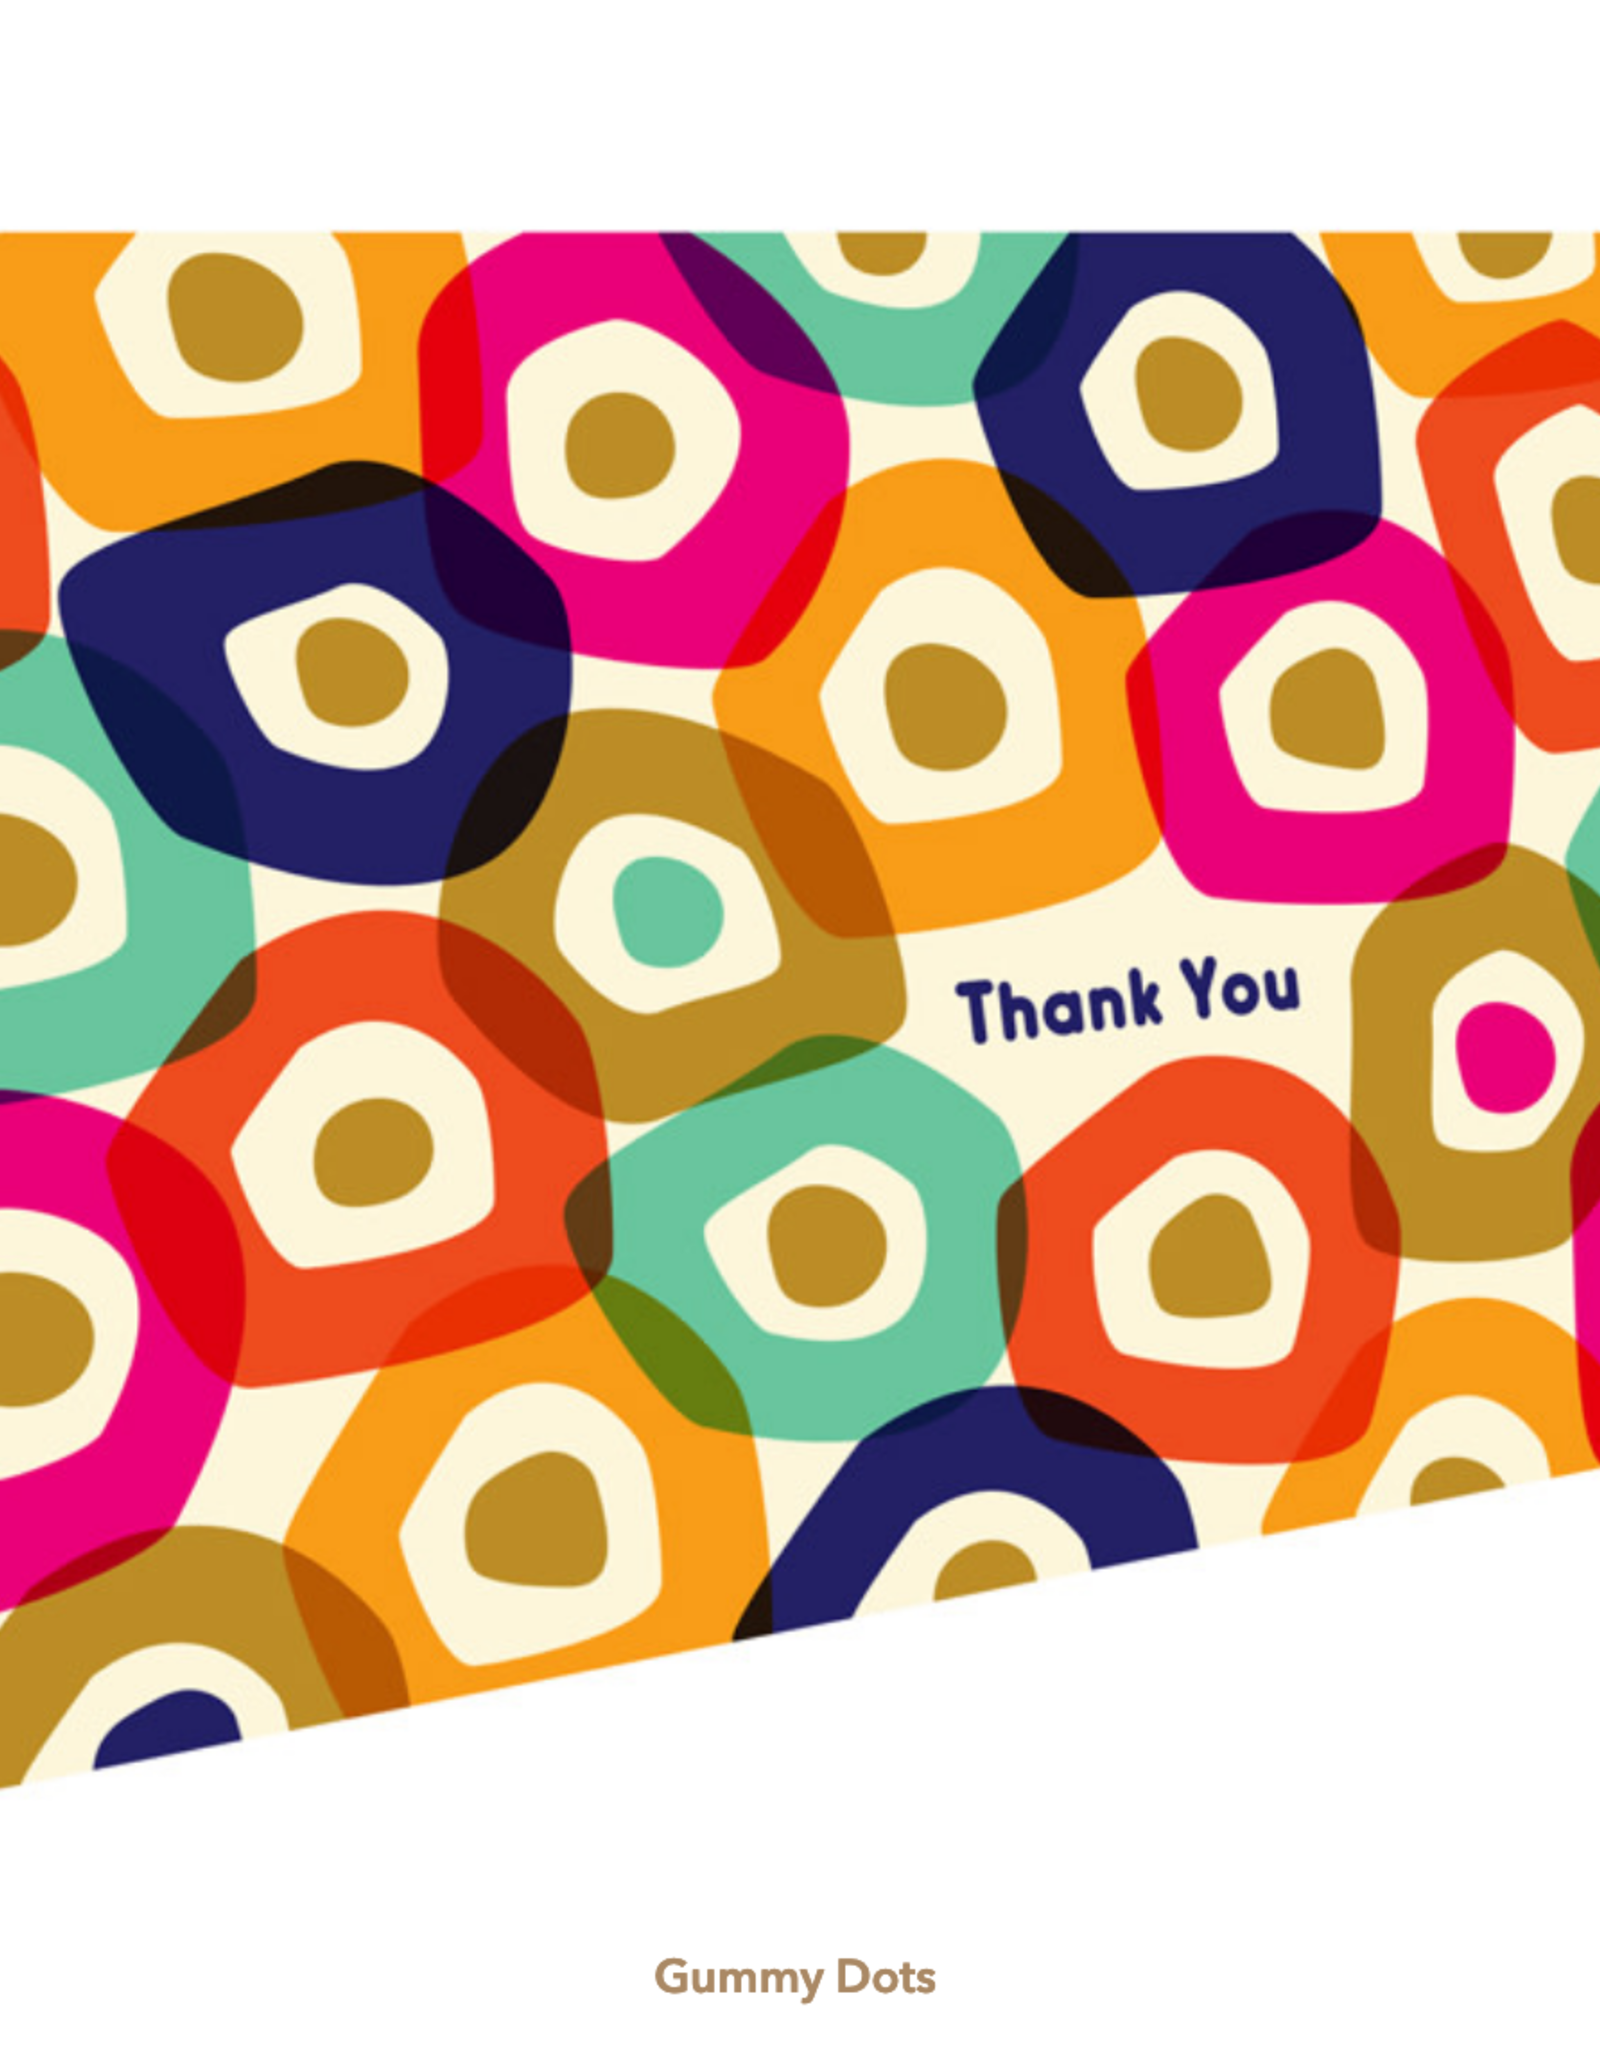 Thank You Gummy Dots Greeting Card